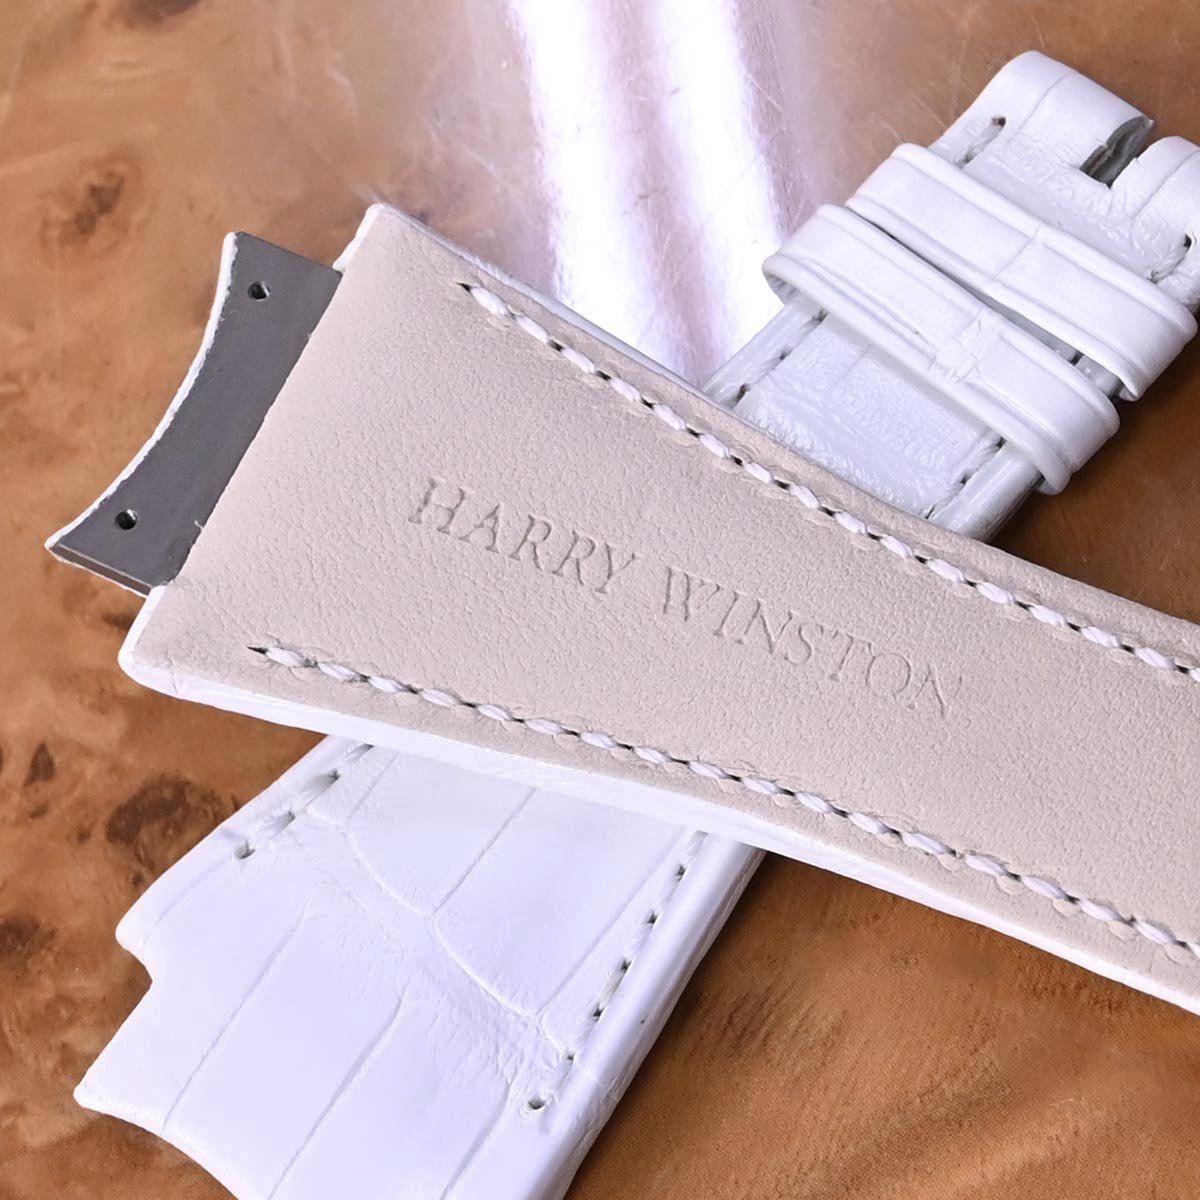  genuine article new goods same Harry Winston genuine products Ocean crocodile leather belt 29mm width wristwatch for white black ko watch band 